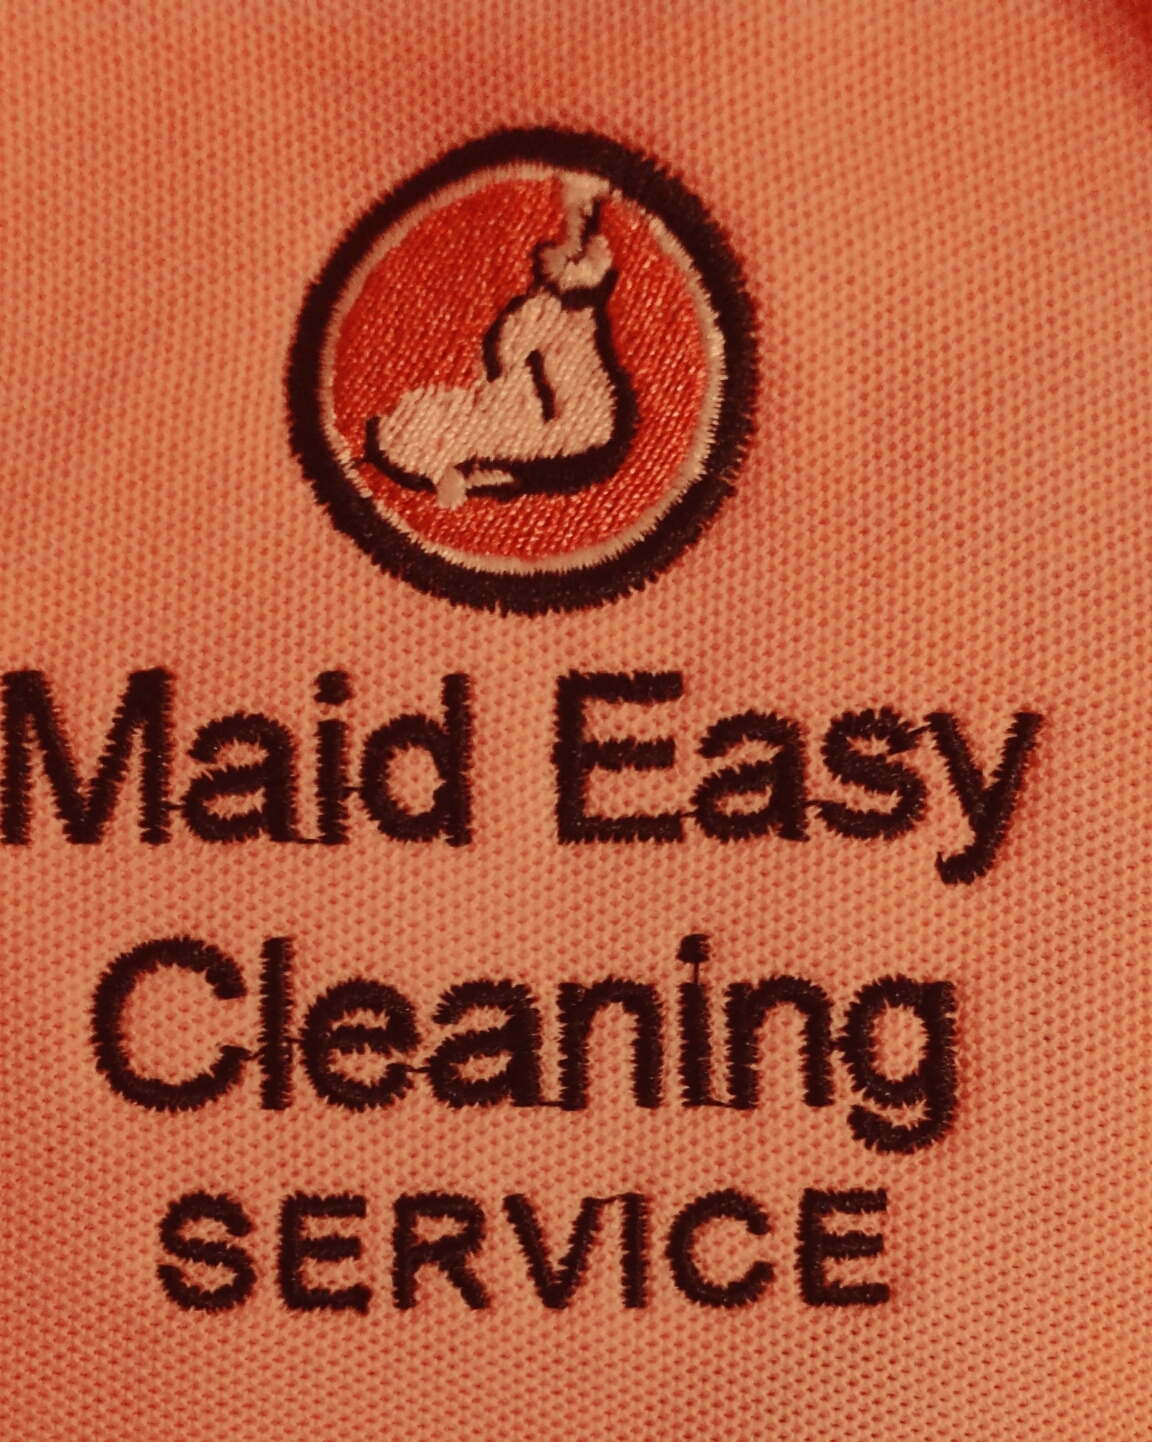 Maid Easy Cleaning Services Logo